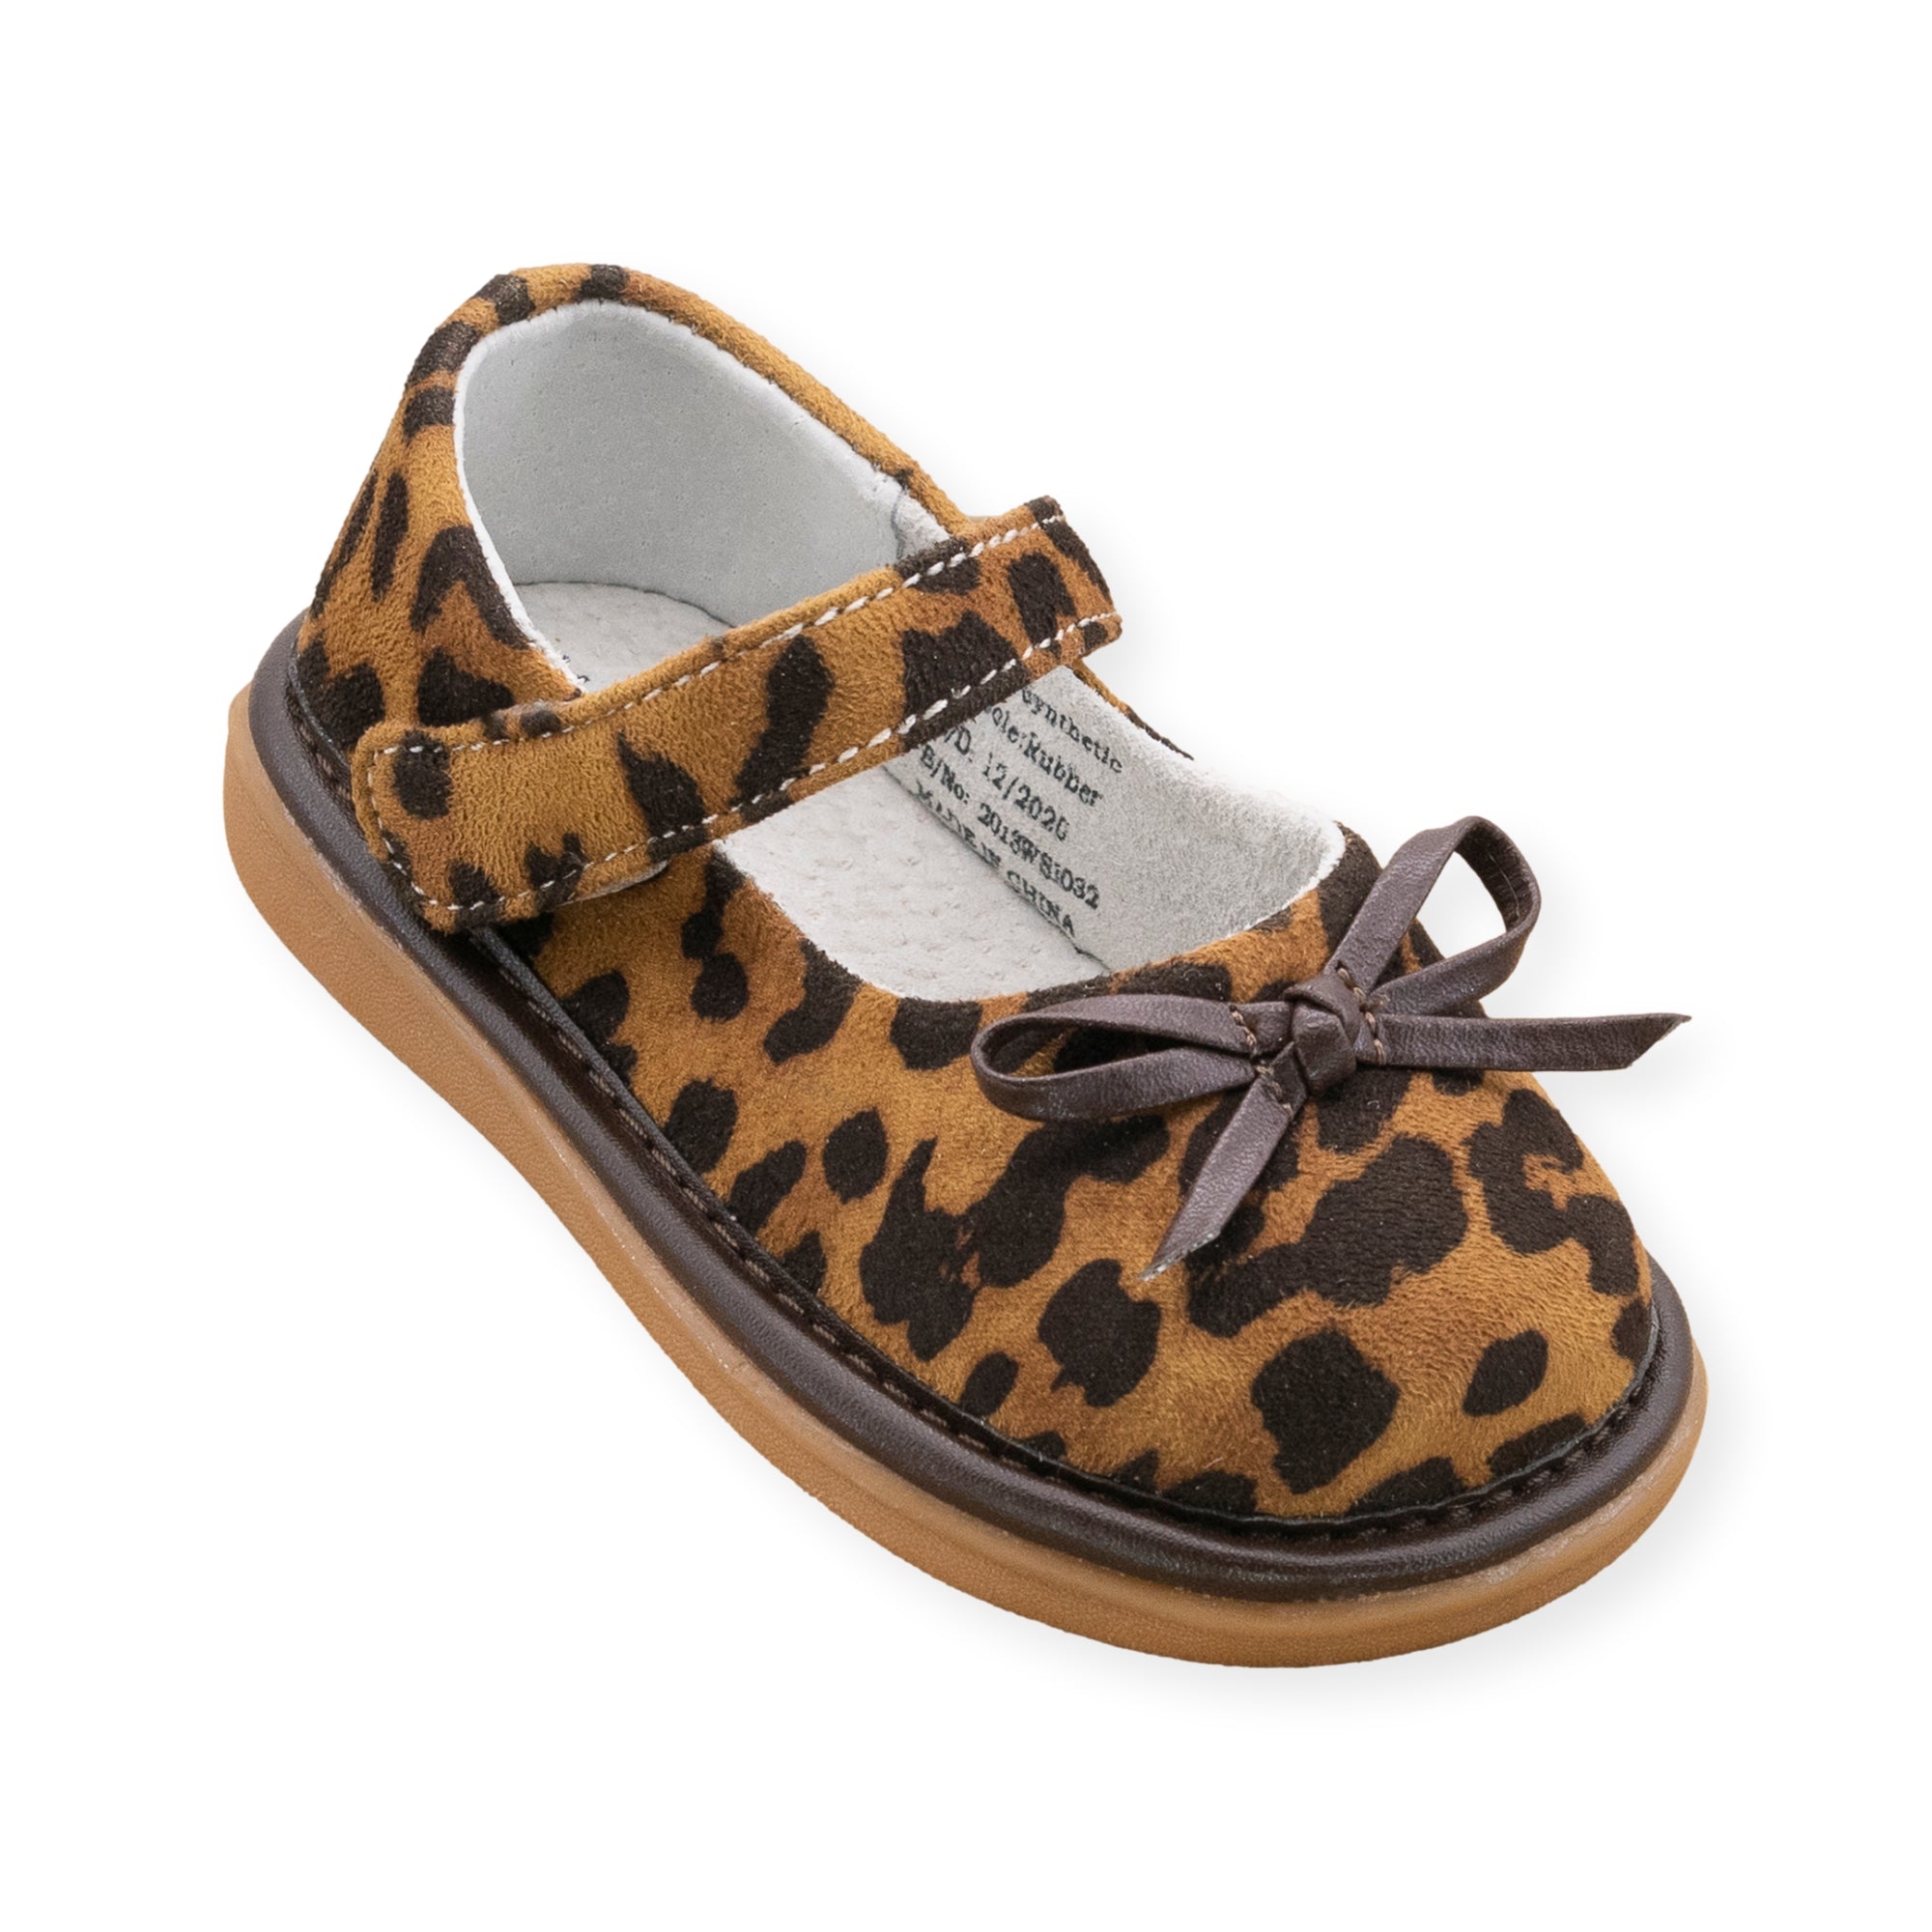 CoCo Leopard Squeaky Shoe by Wee Squeak